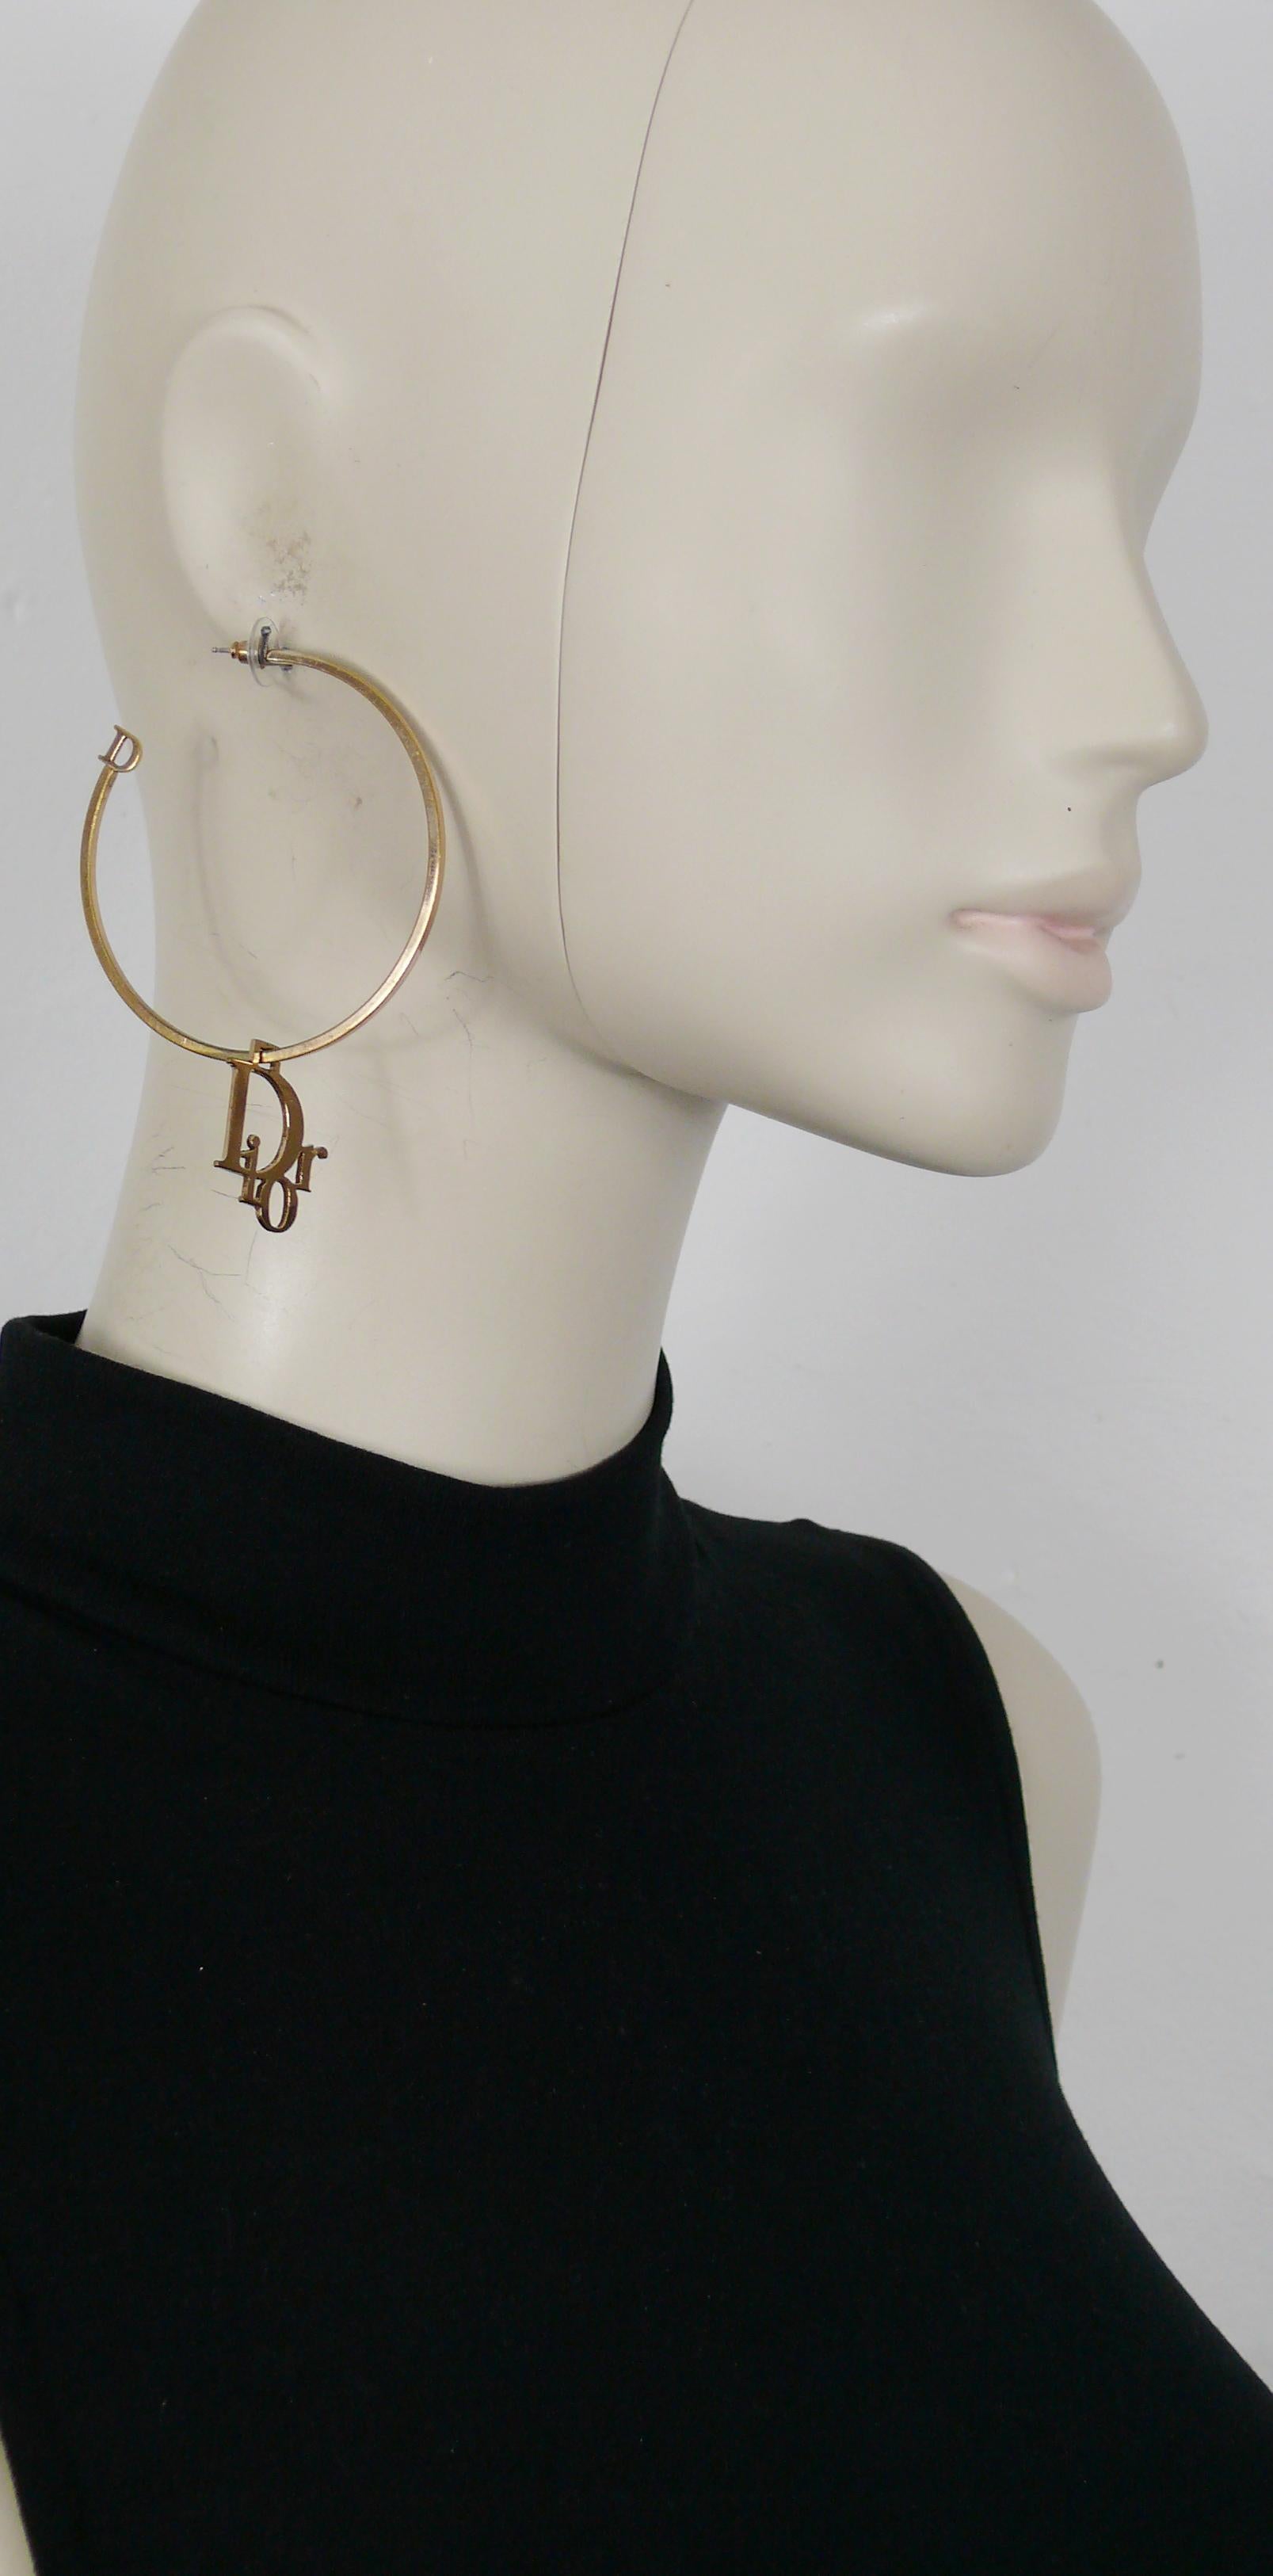 CHRSITIAN DIOR gold toned hoop earrings (for pierced ears) featuring a DIOR Log charm.

Embossed DIOR.

Indicative measurements : diameter approx. 6 cm (2.36 inches).

Comes with the original CHRISTIAN DIOR box (very used vintage